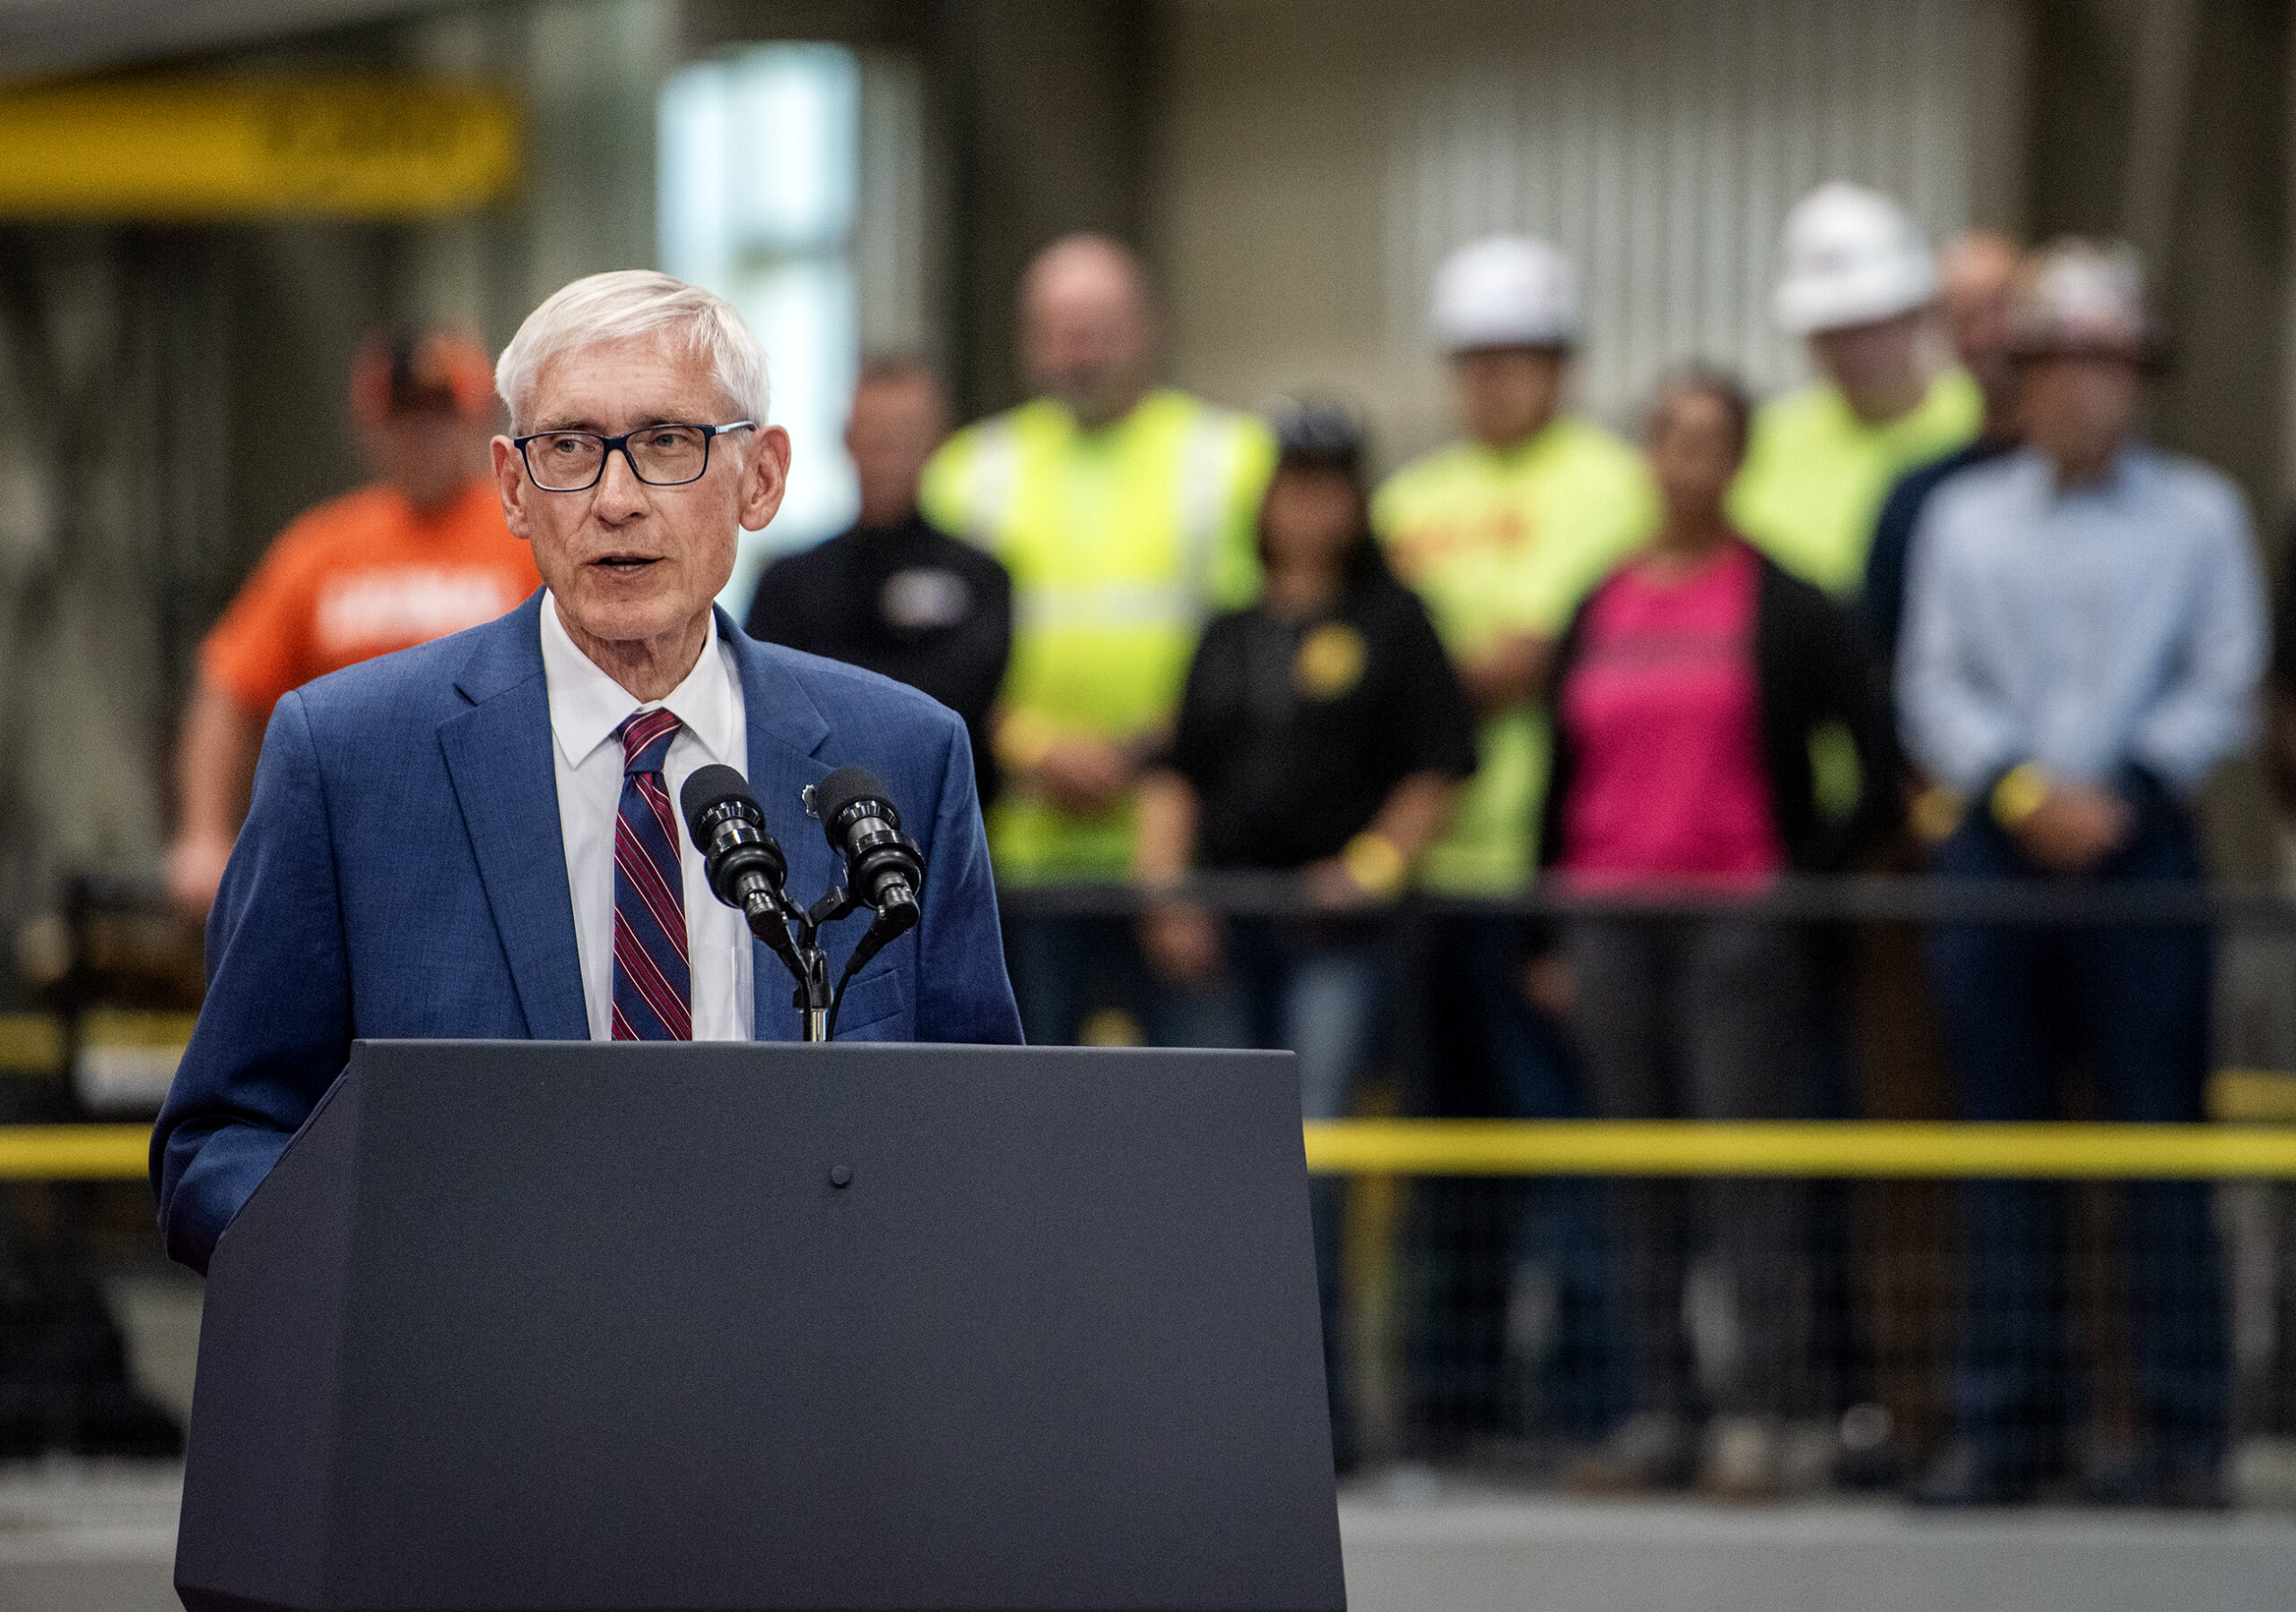 Gov. Tony Evers speaks at a podium. Workers can be seen behind him.